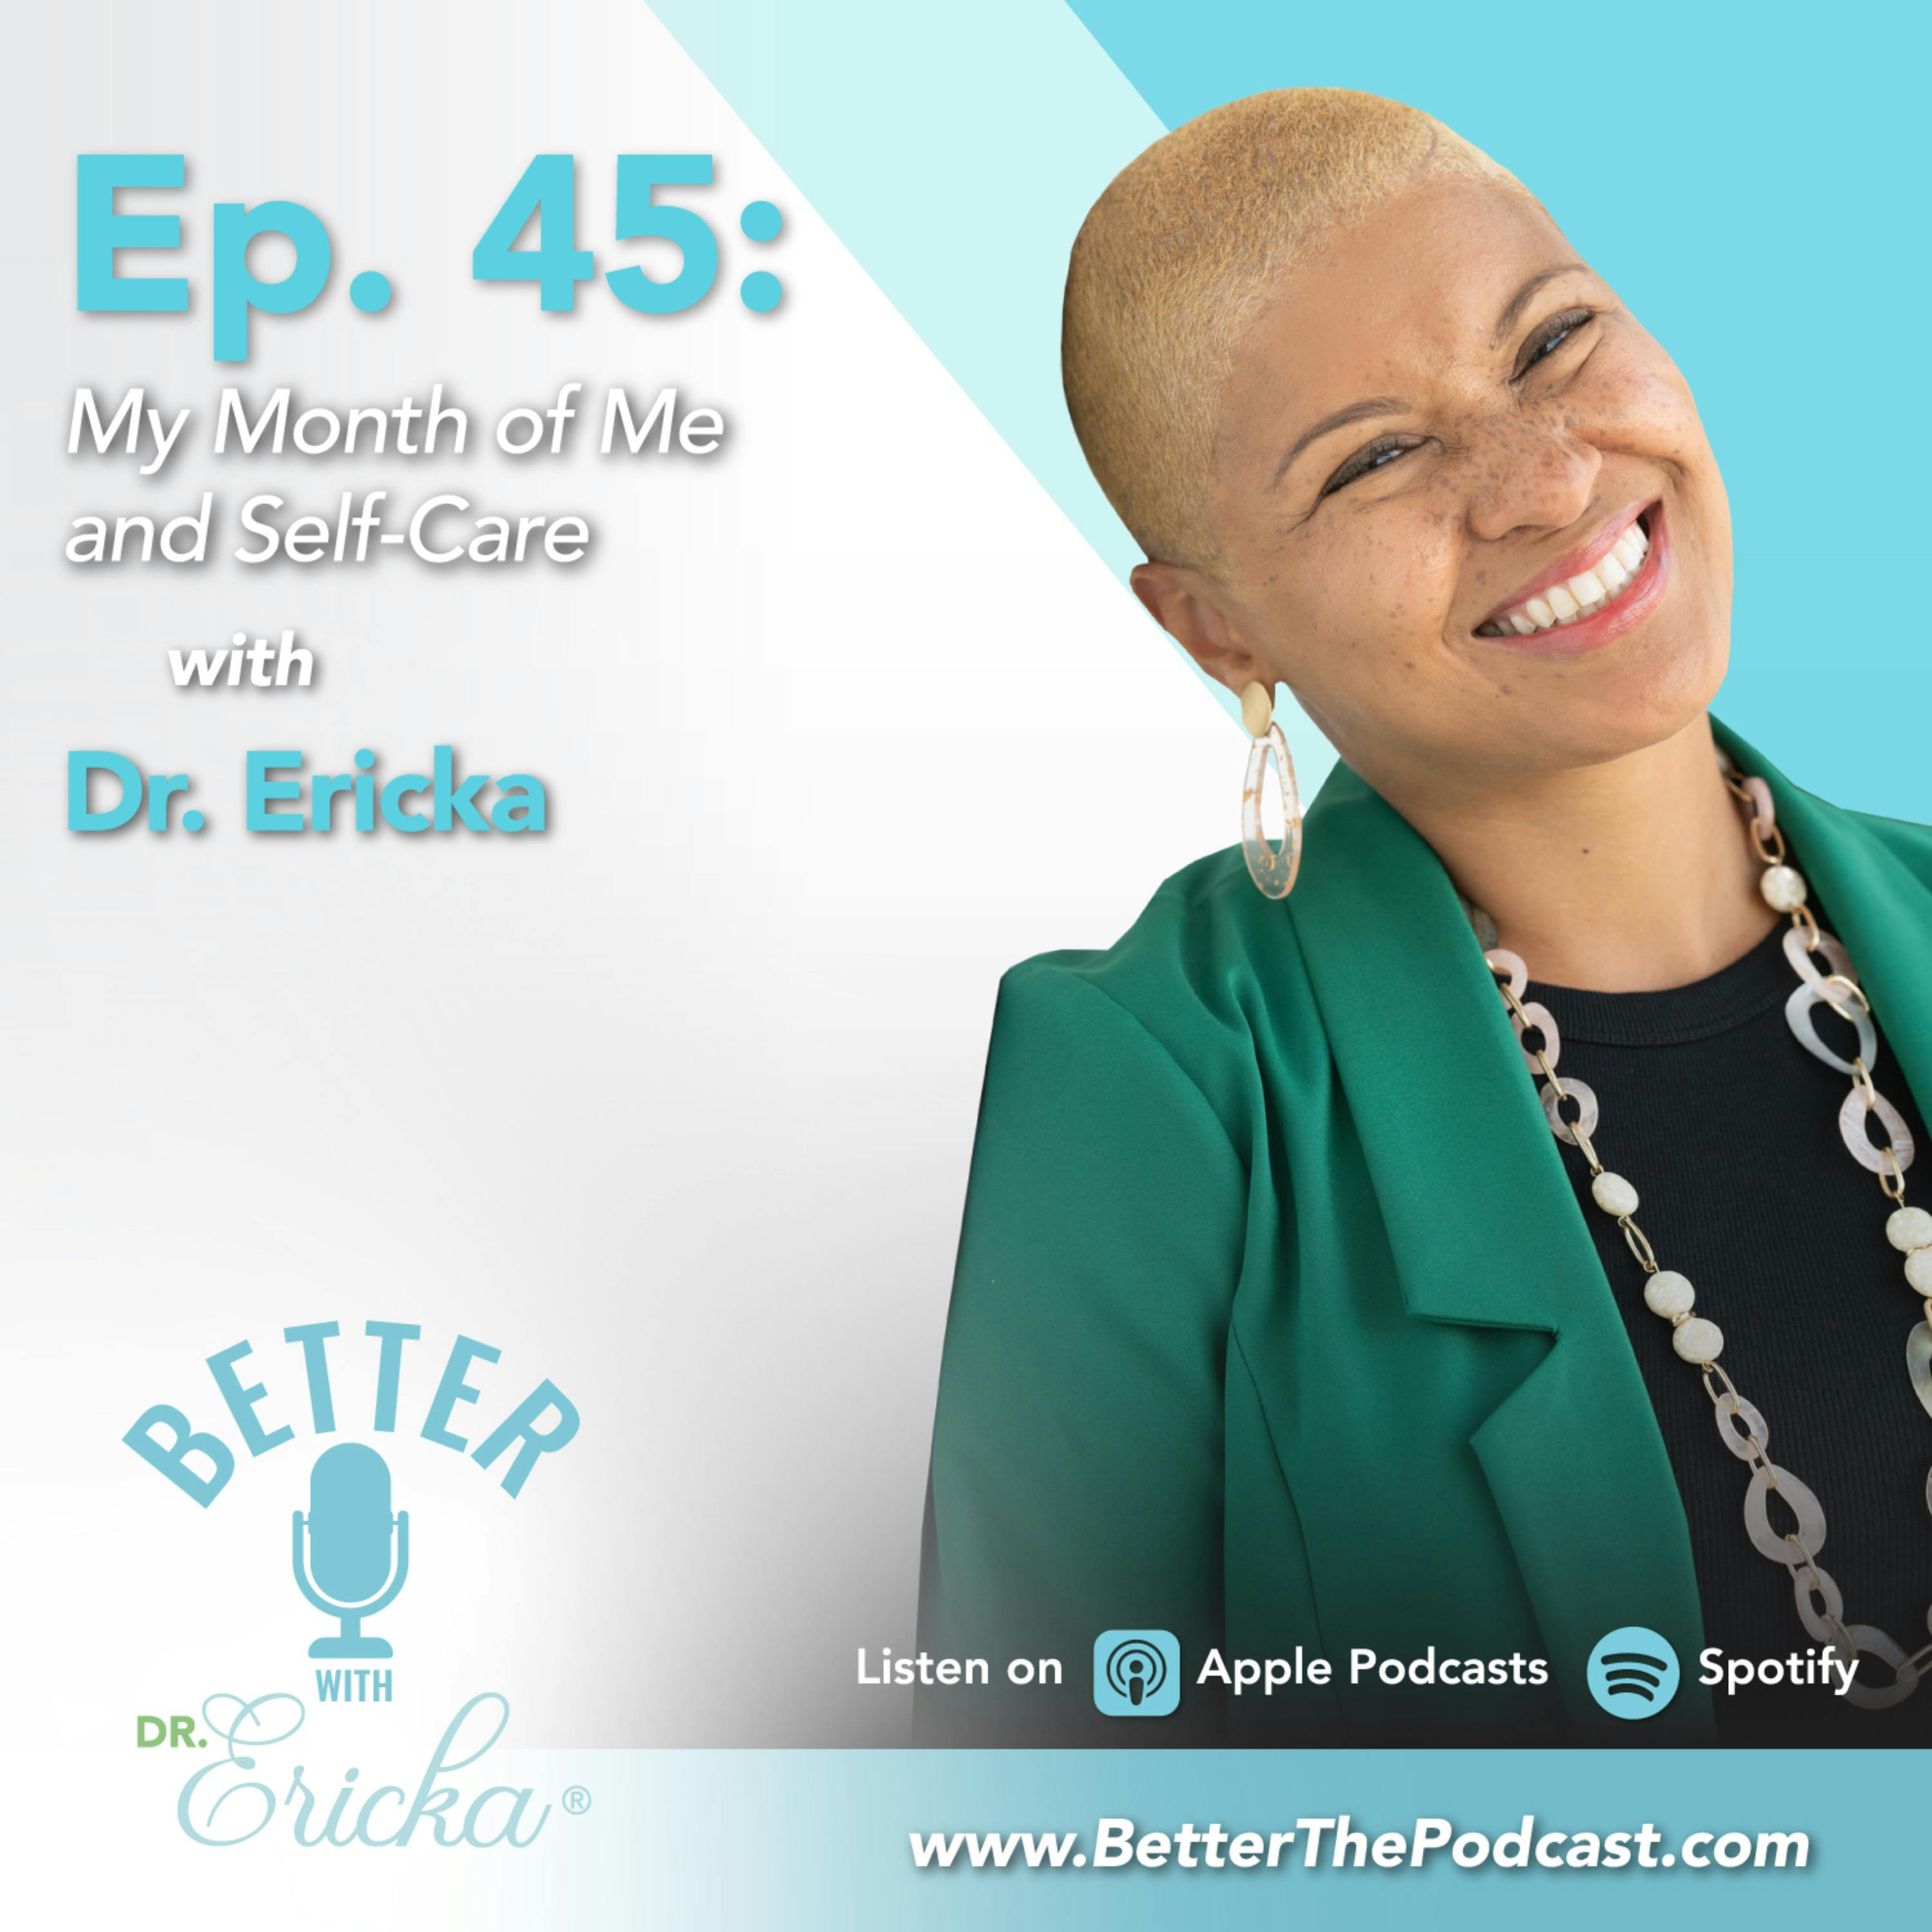 My Month of Me and Self-Care with Dr. Ericka Goodwin